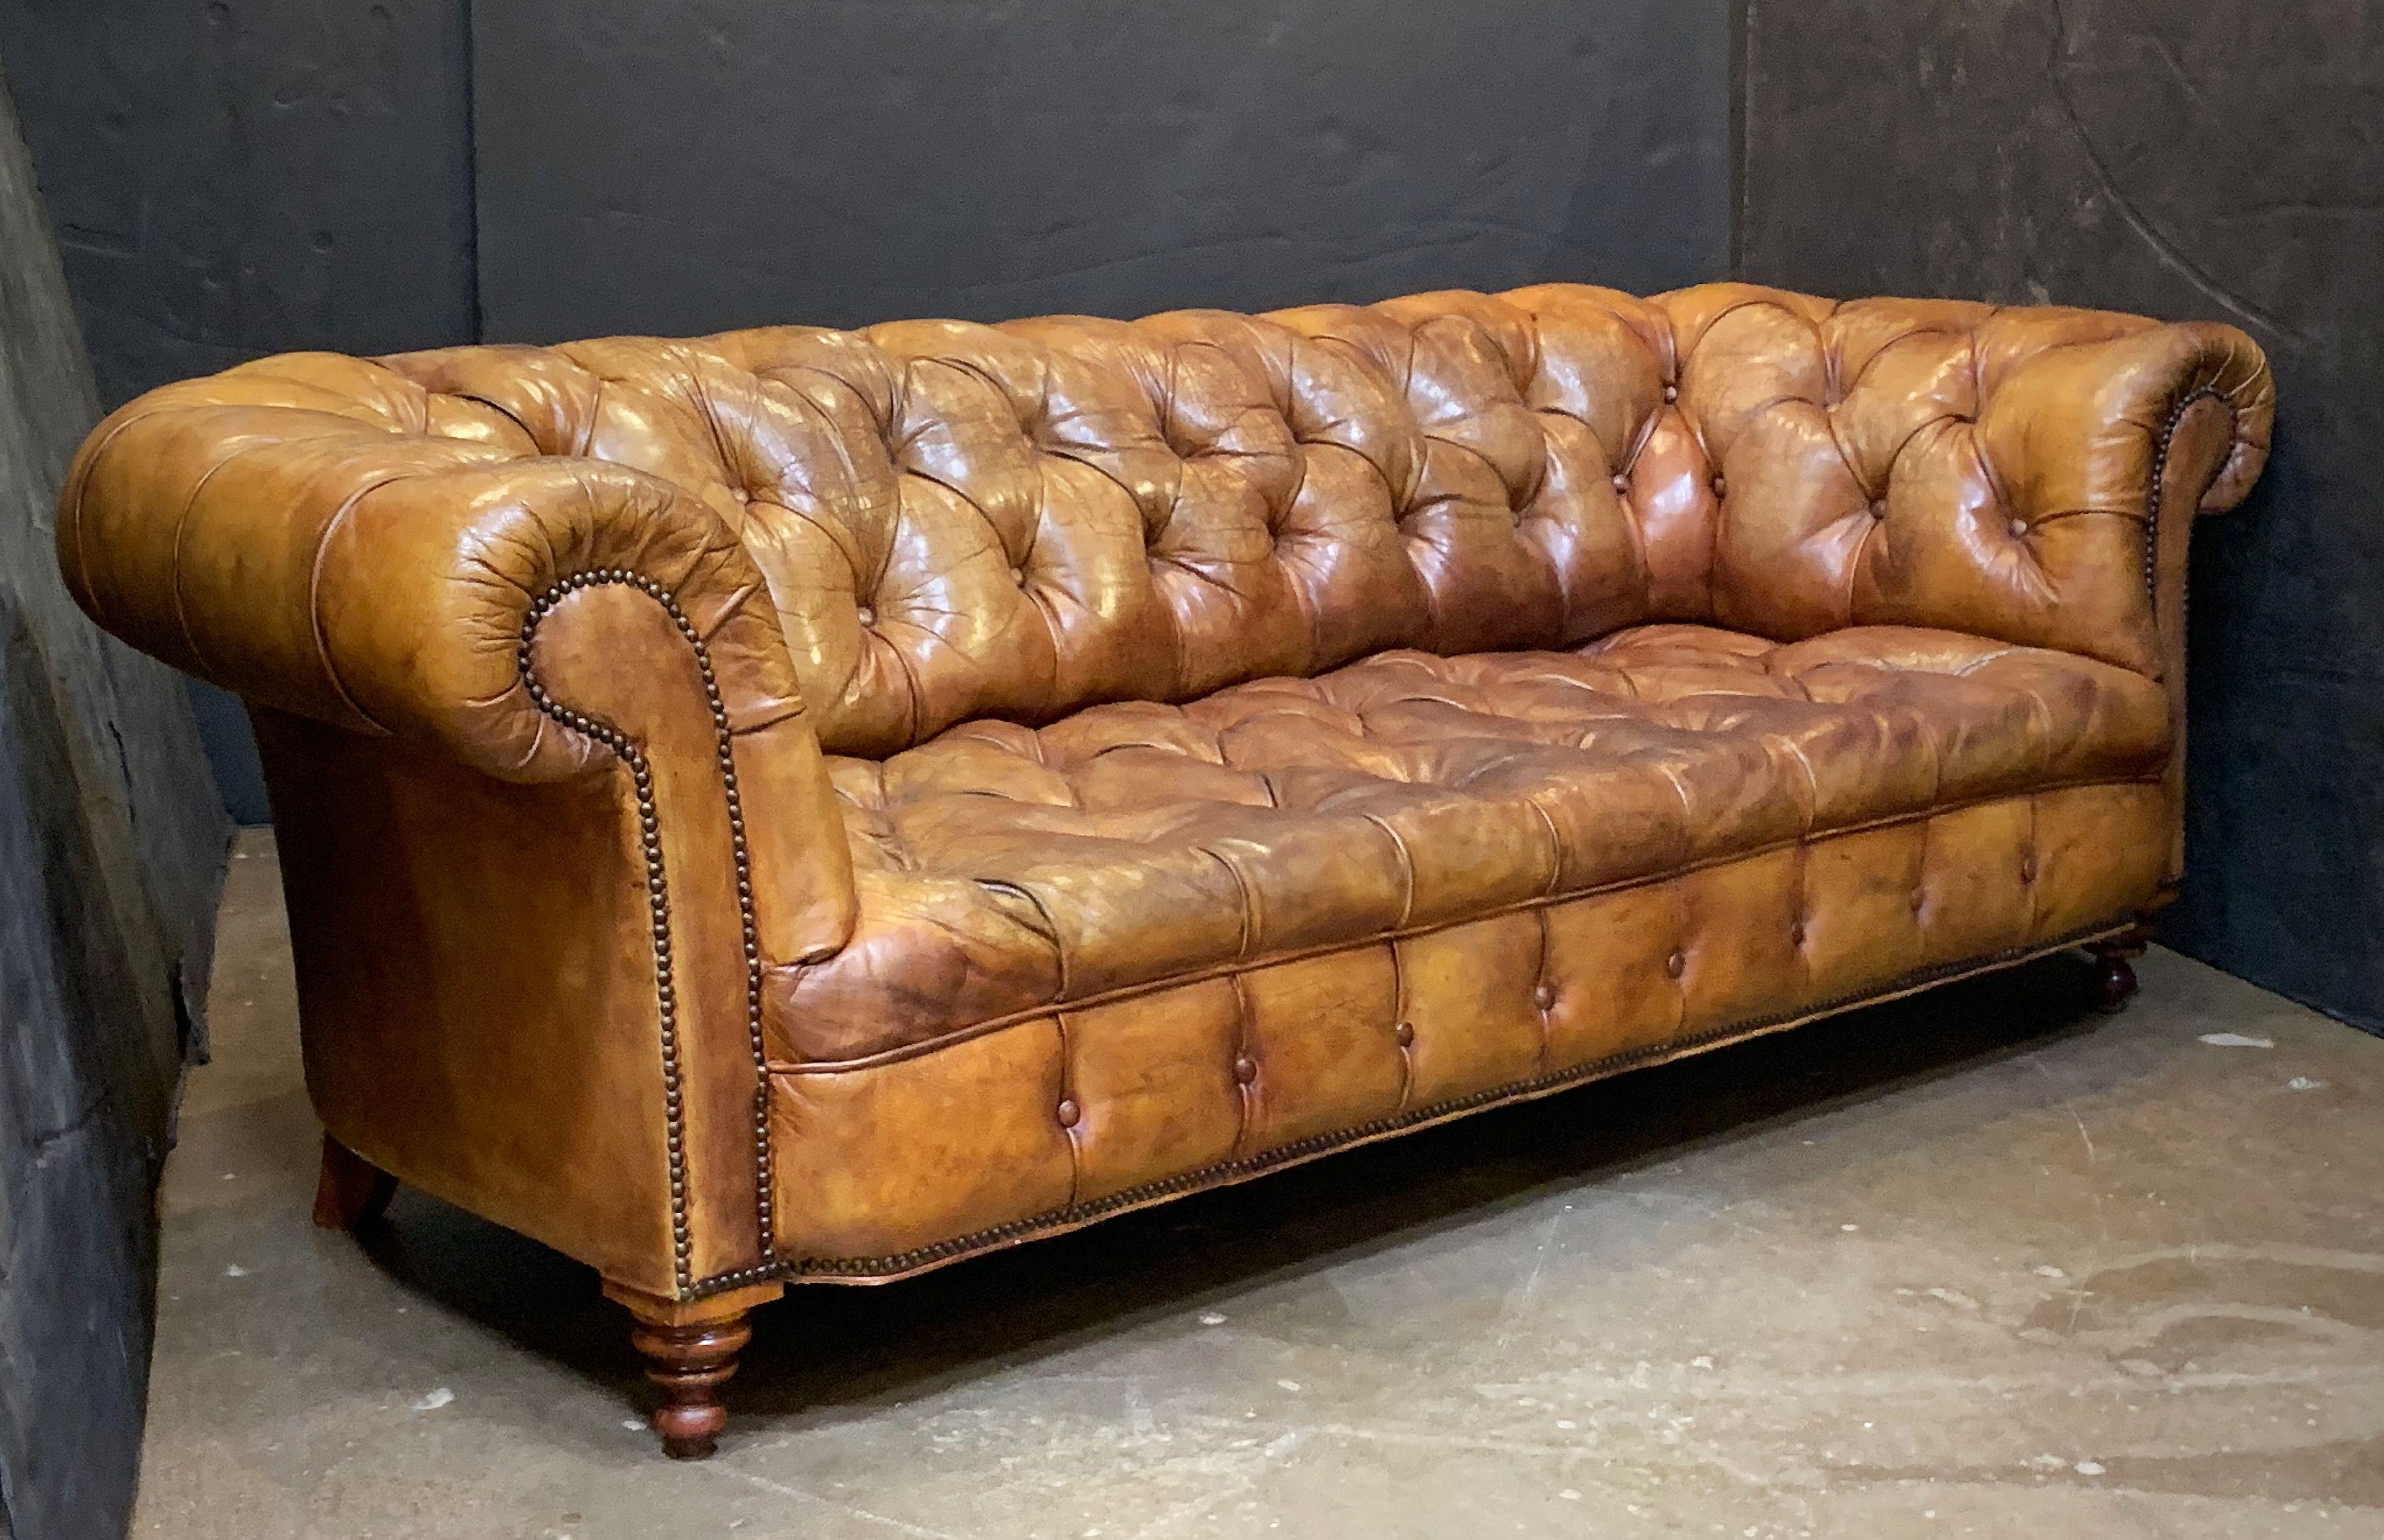 A fine, comfortable English Chesterfield sofa in vintage brown or tobacco leather featuring button-tufted back, arms, and seat, and beaded-nail trim design, resting on turned feet.

The Chesterfield sofa is a Classic, synonymous with English